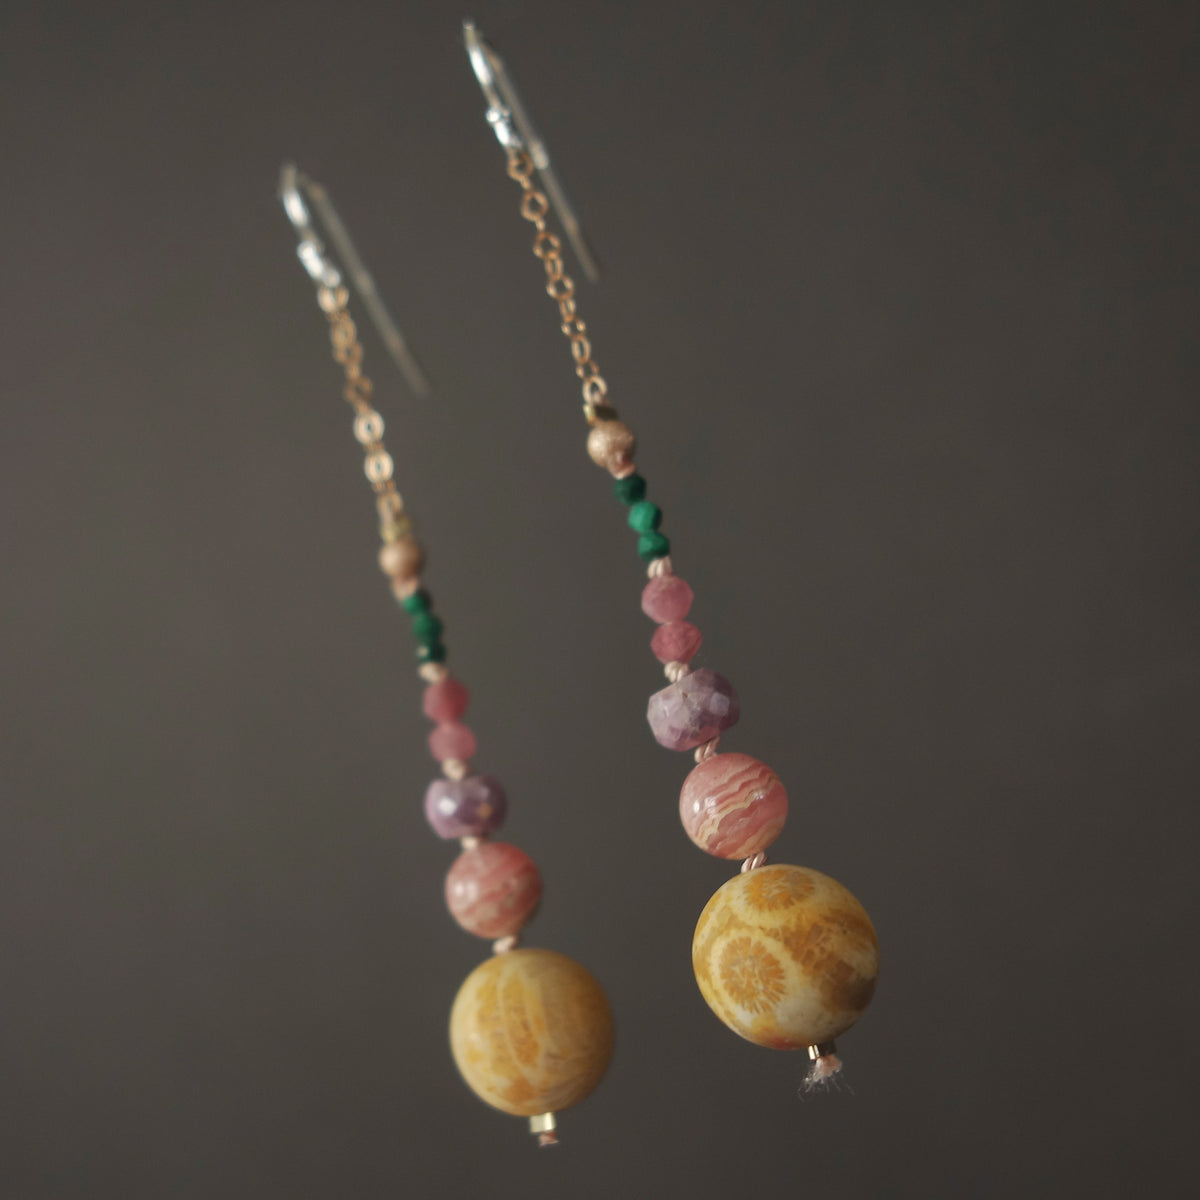 She Sewed Seeds of Kindness: fossilized agate/rhodocrosite ear